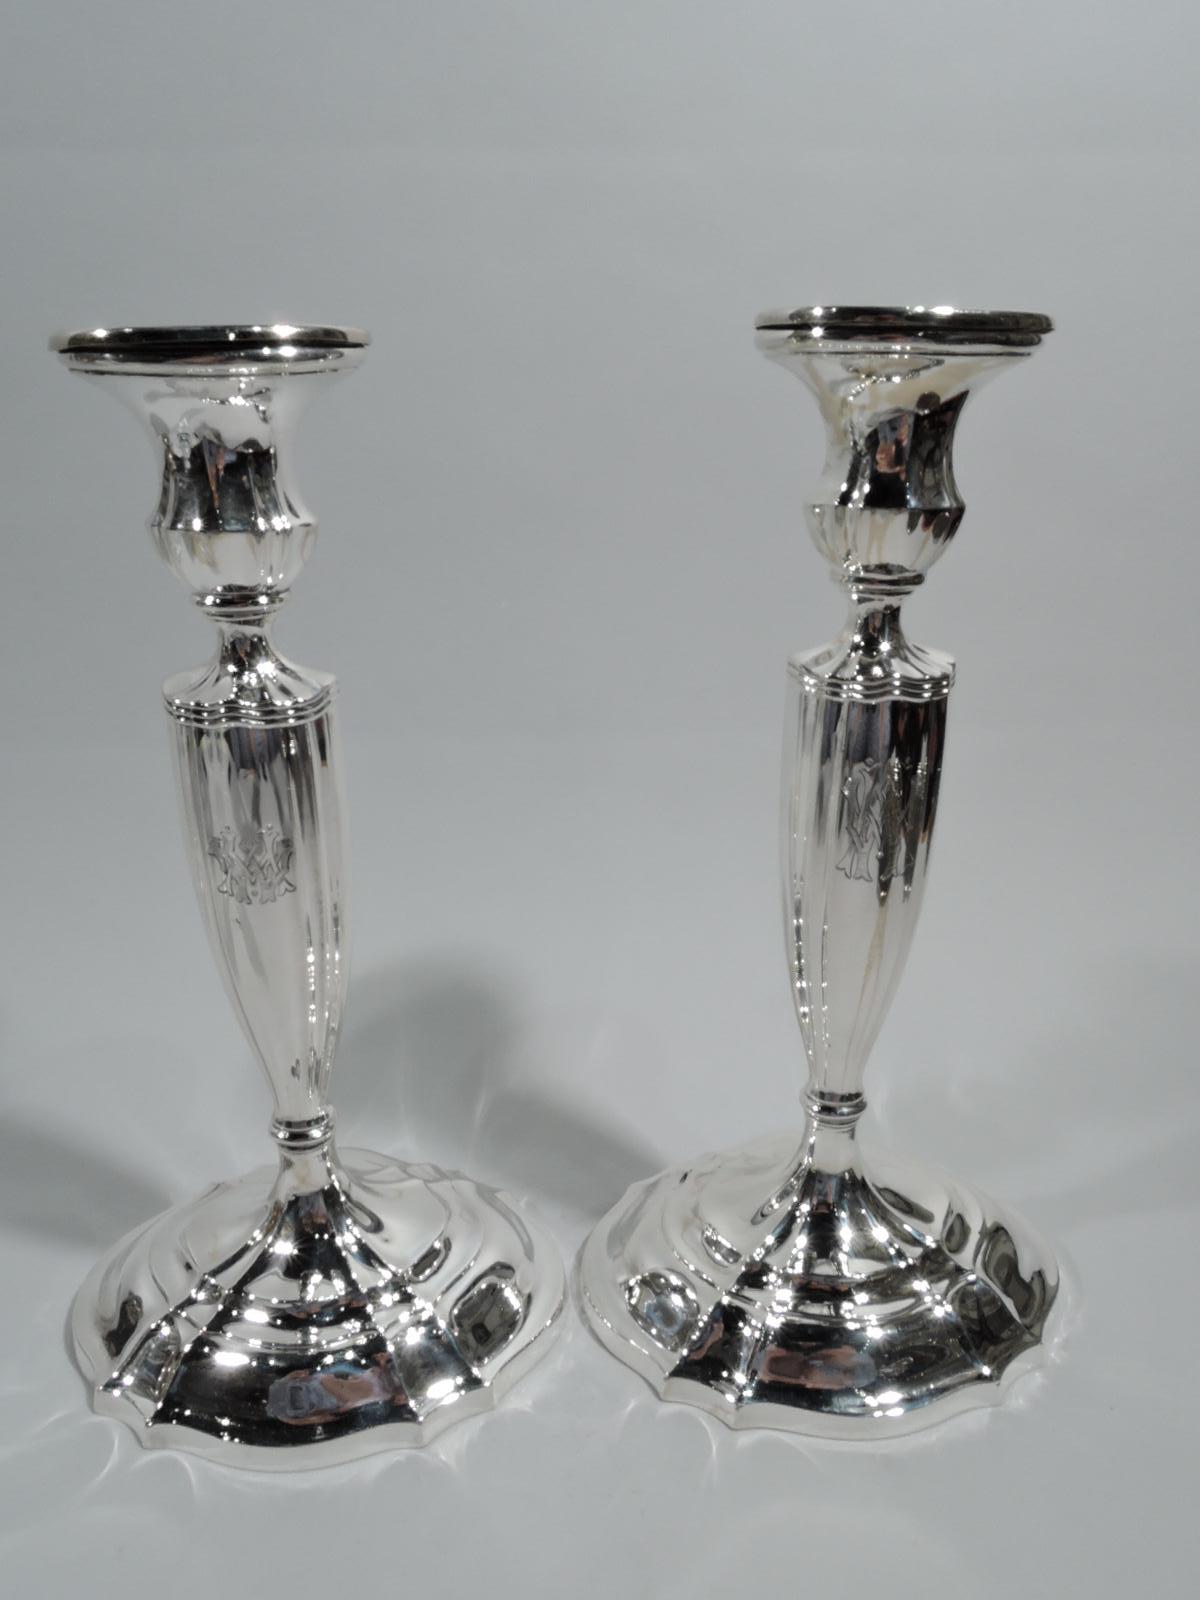 Pair of Edwardian sterling silver candlesticks. Made by Gorham in Providence in 1905. Each: Ovoid, tapering, and fluted shaft with interlaced script monogram; stepped oval foot. Urn socket with detachable bobeche. Fully marked including date symbol